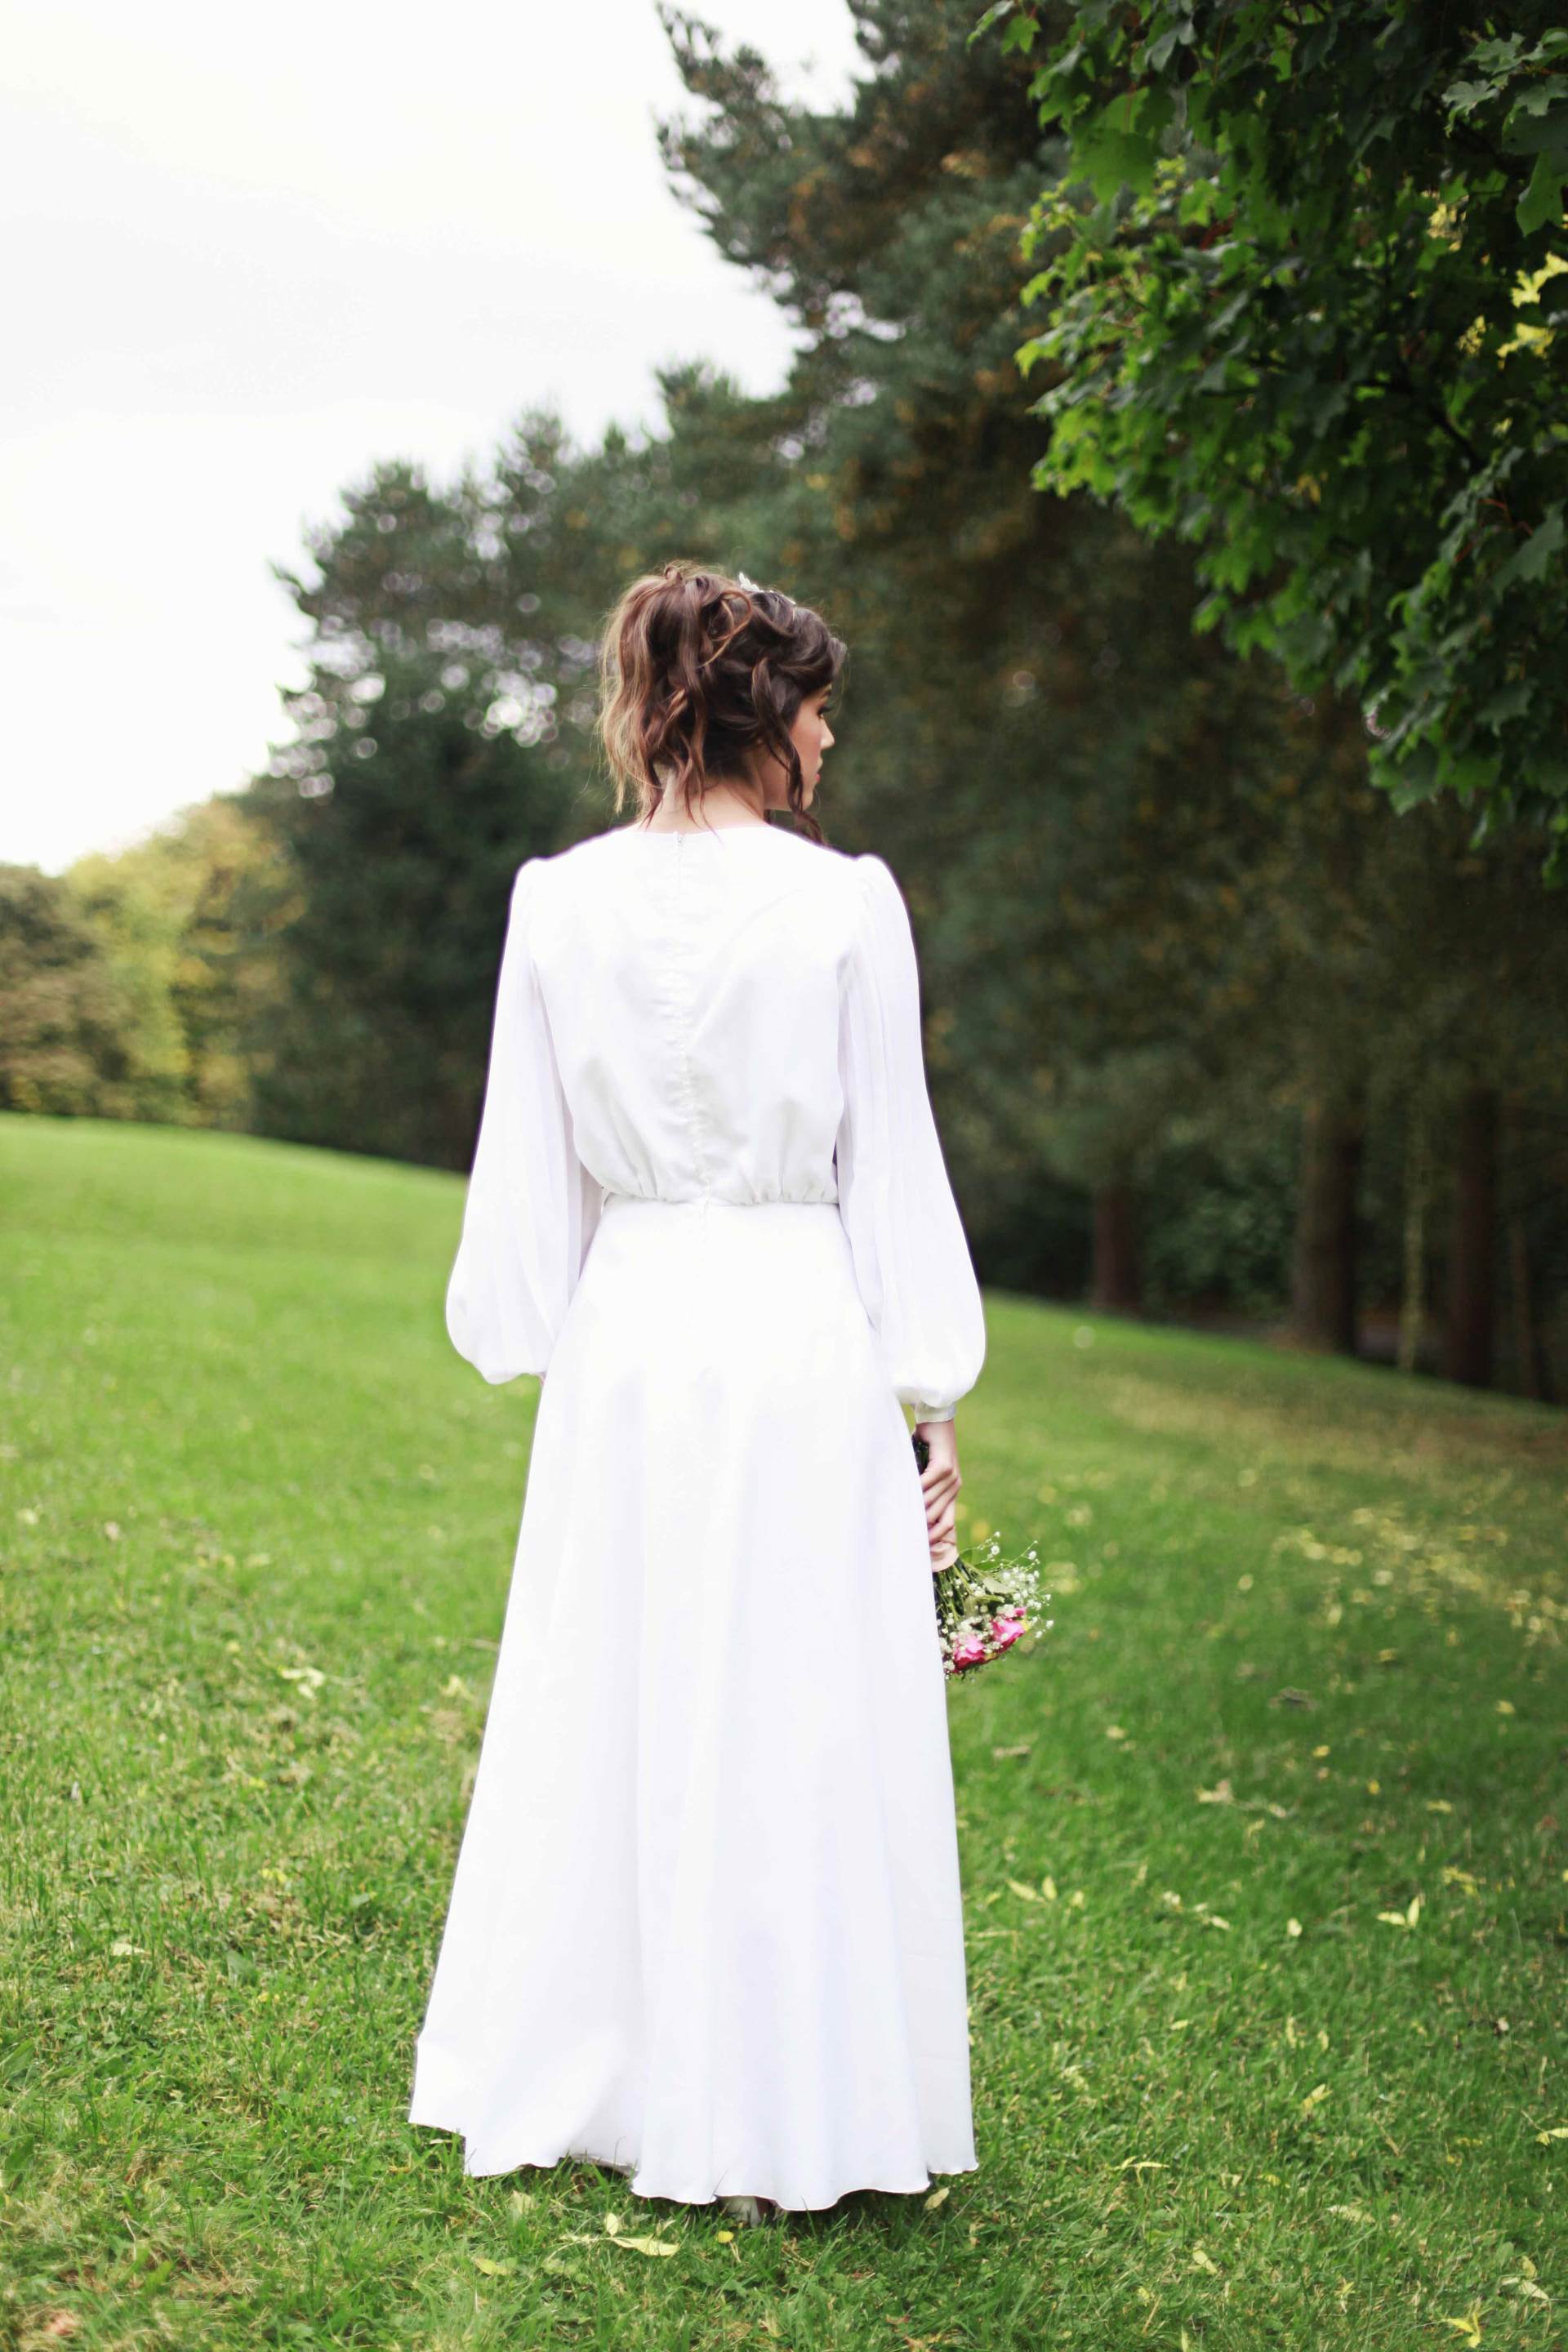 Autumn Styled Wedding Shoot by Nina Pang with vintage wedding dresses as featured on The National Vintage Wedding Fair blog